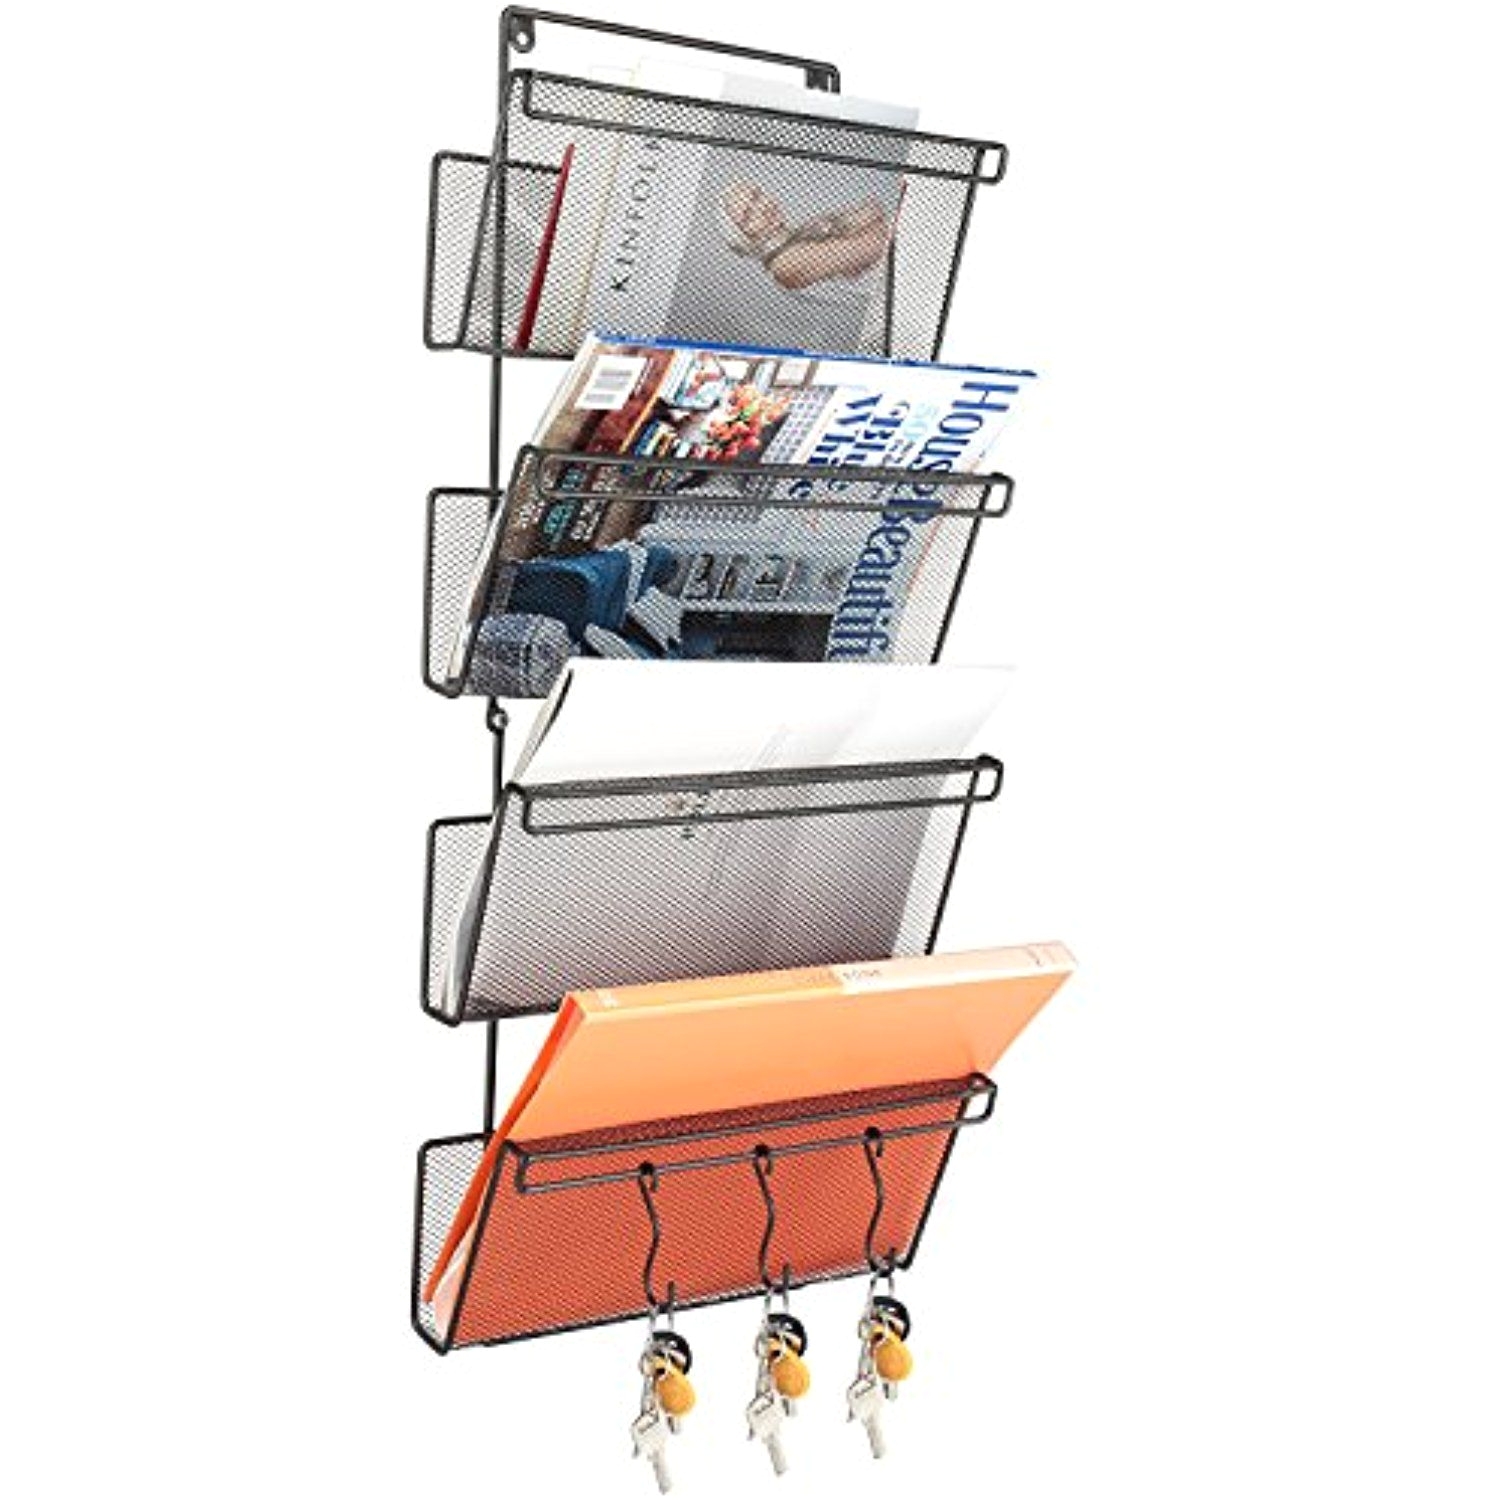 samstar 4 tier hanging wall file organizer metal mesh wall mounted file holder with 3 key hooks for office home click image for more details